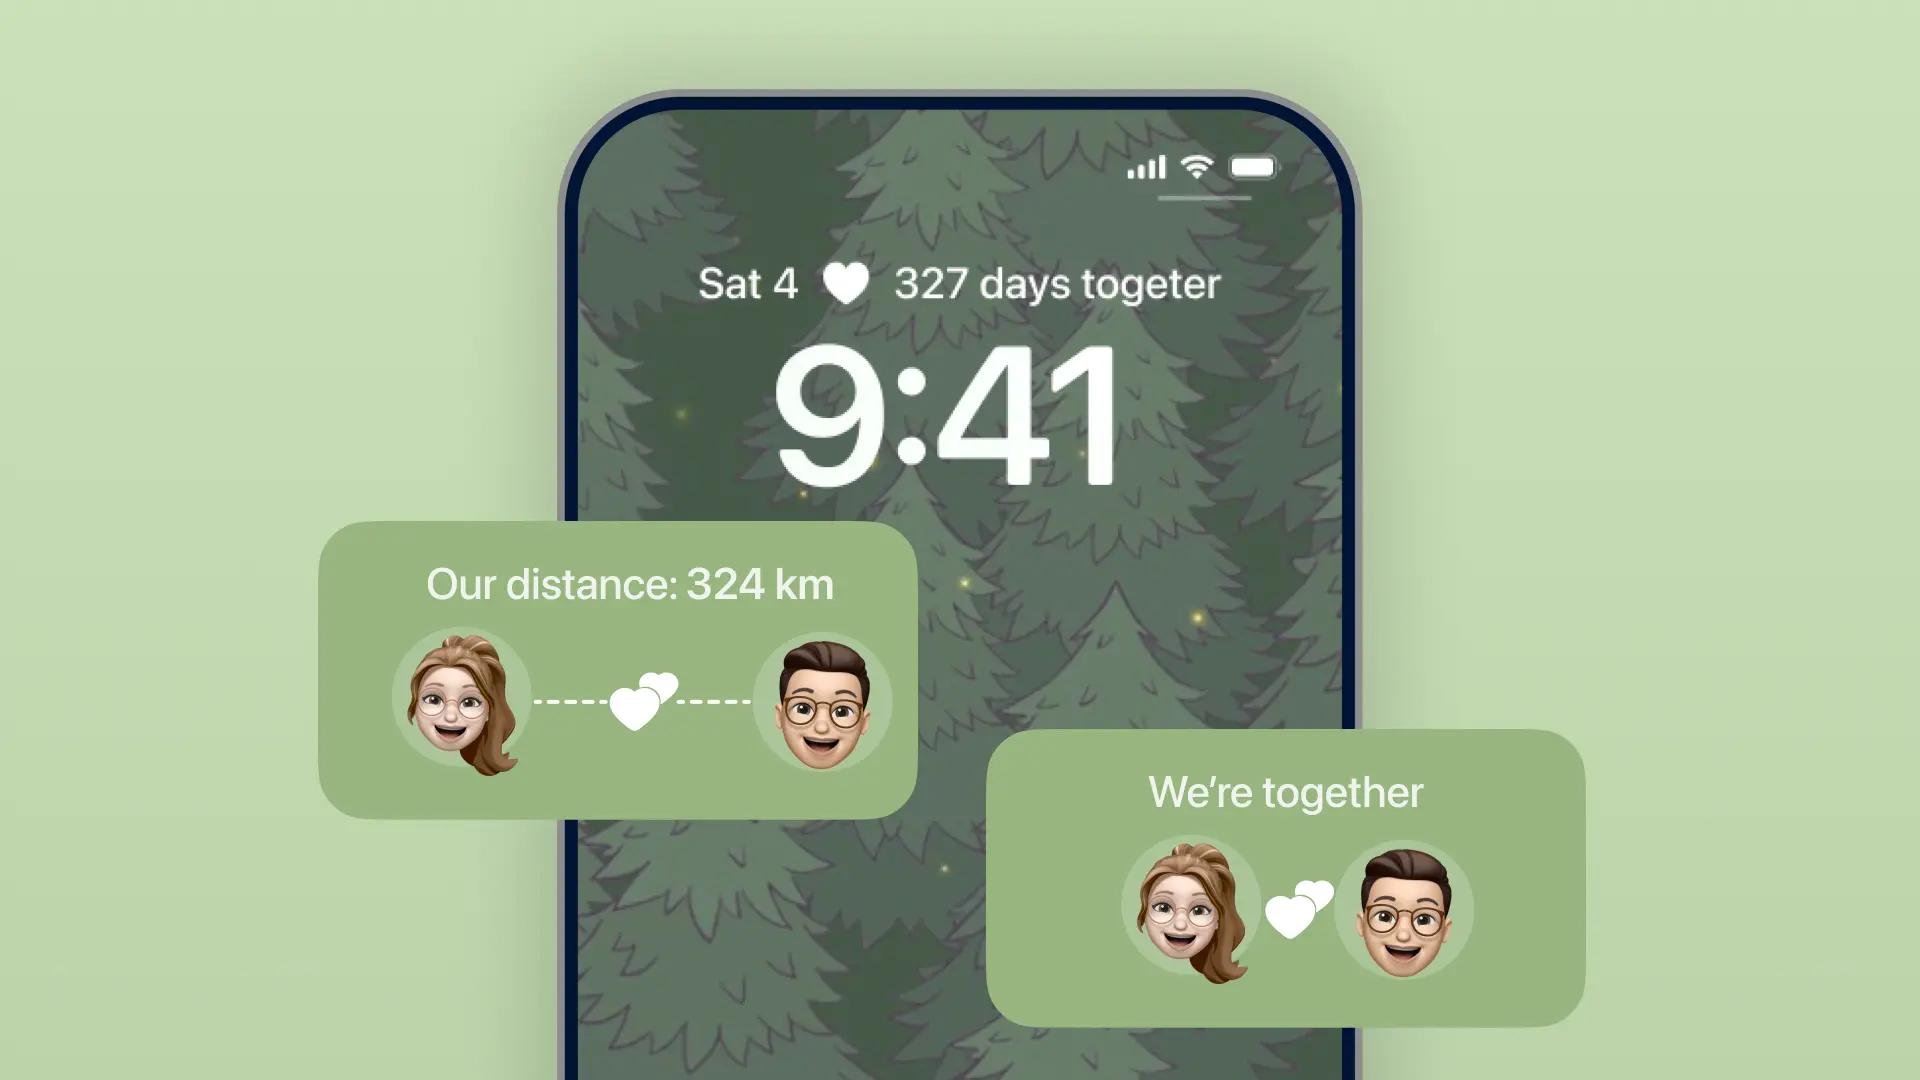 Cover Image for How to add distance apart widget on iPhone